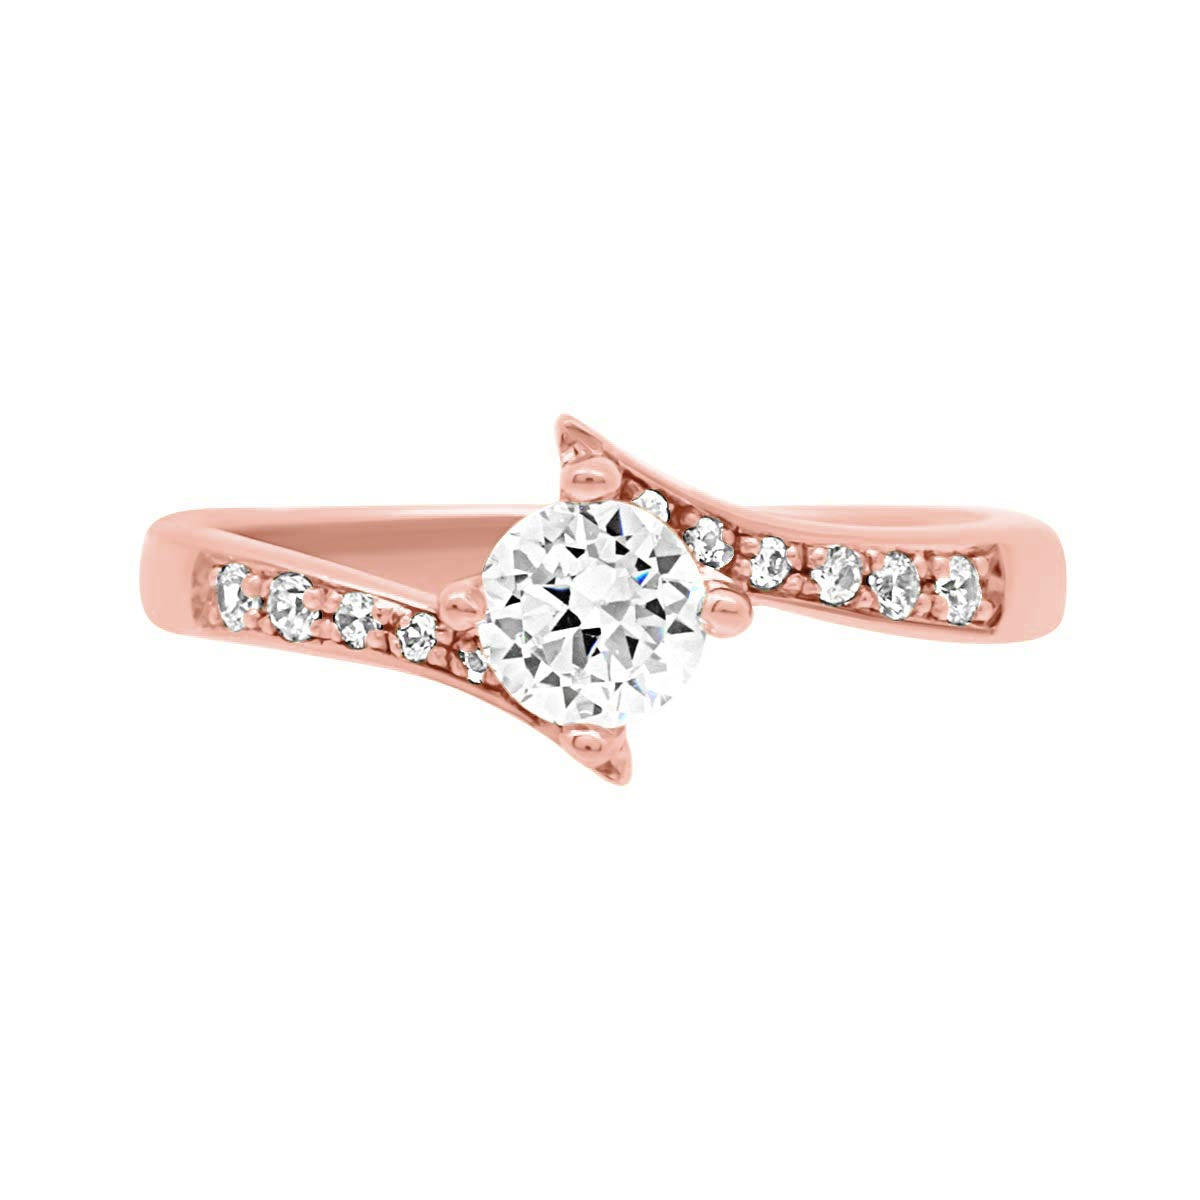 Quirky Diamond Engagement Ring in rose gold and lying flat on a white surface